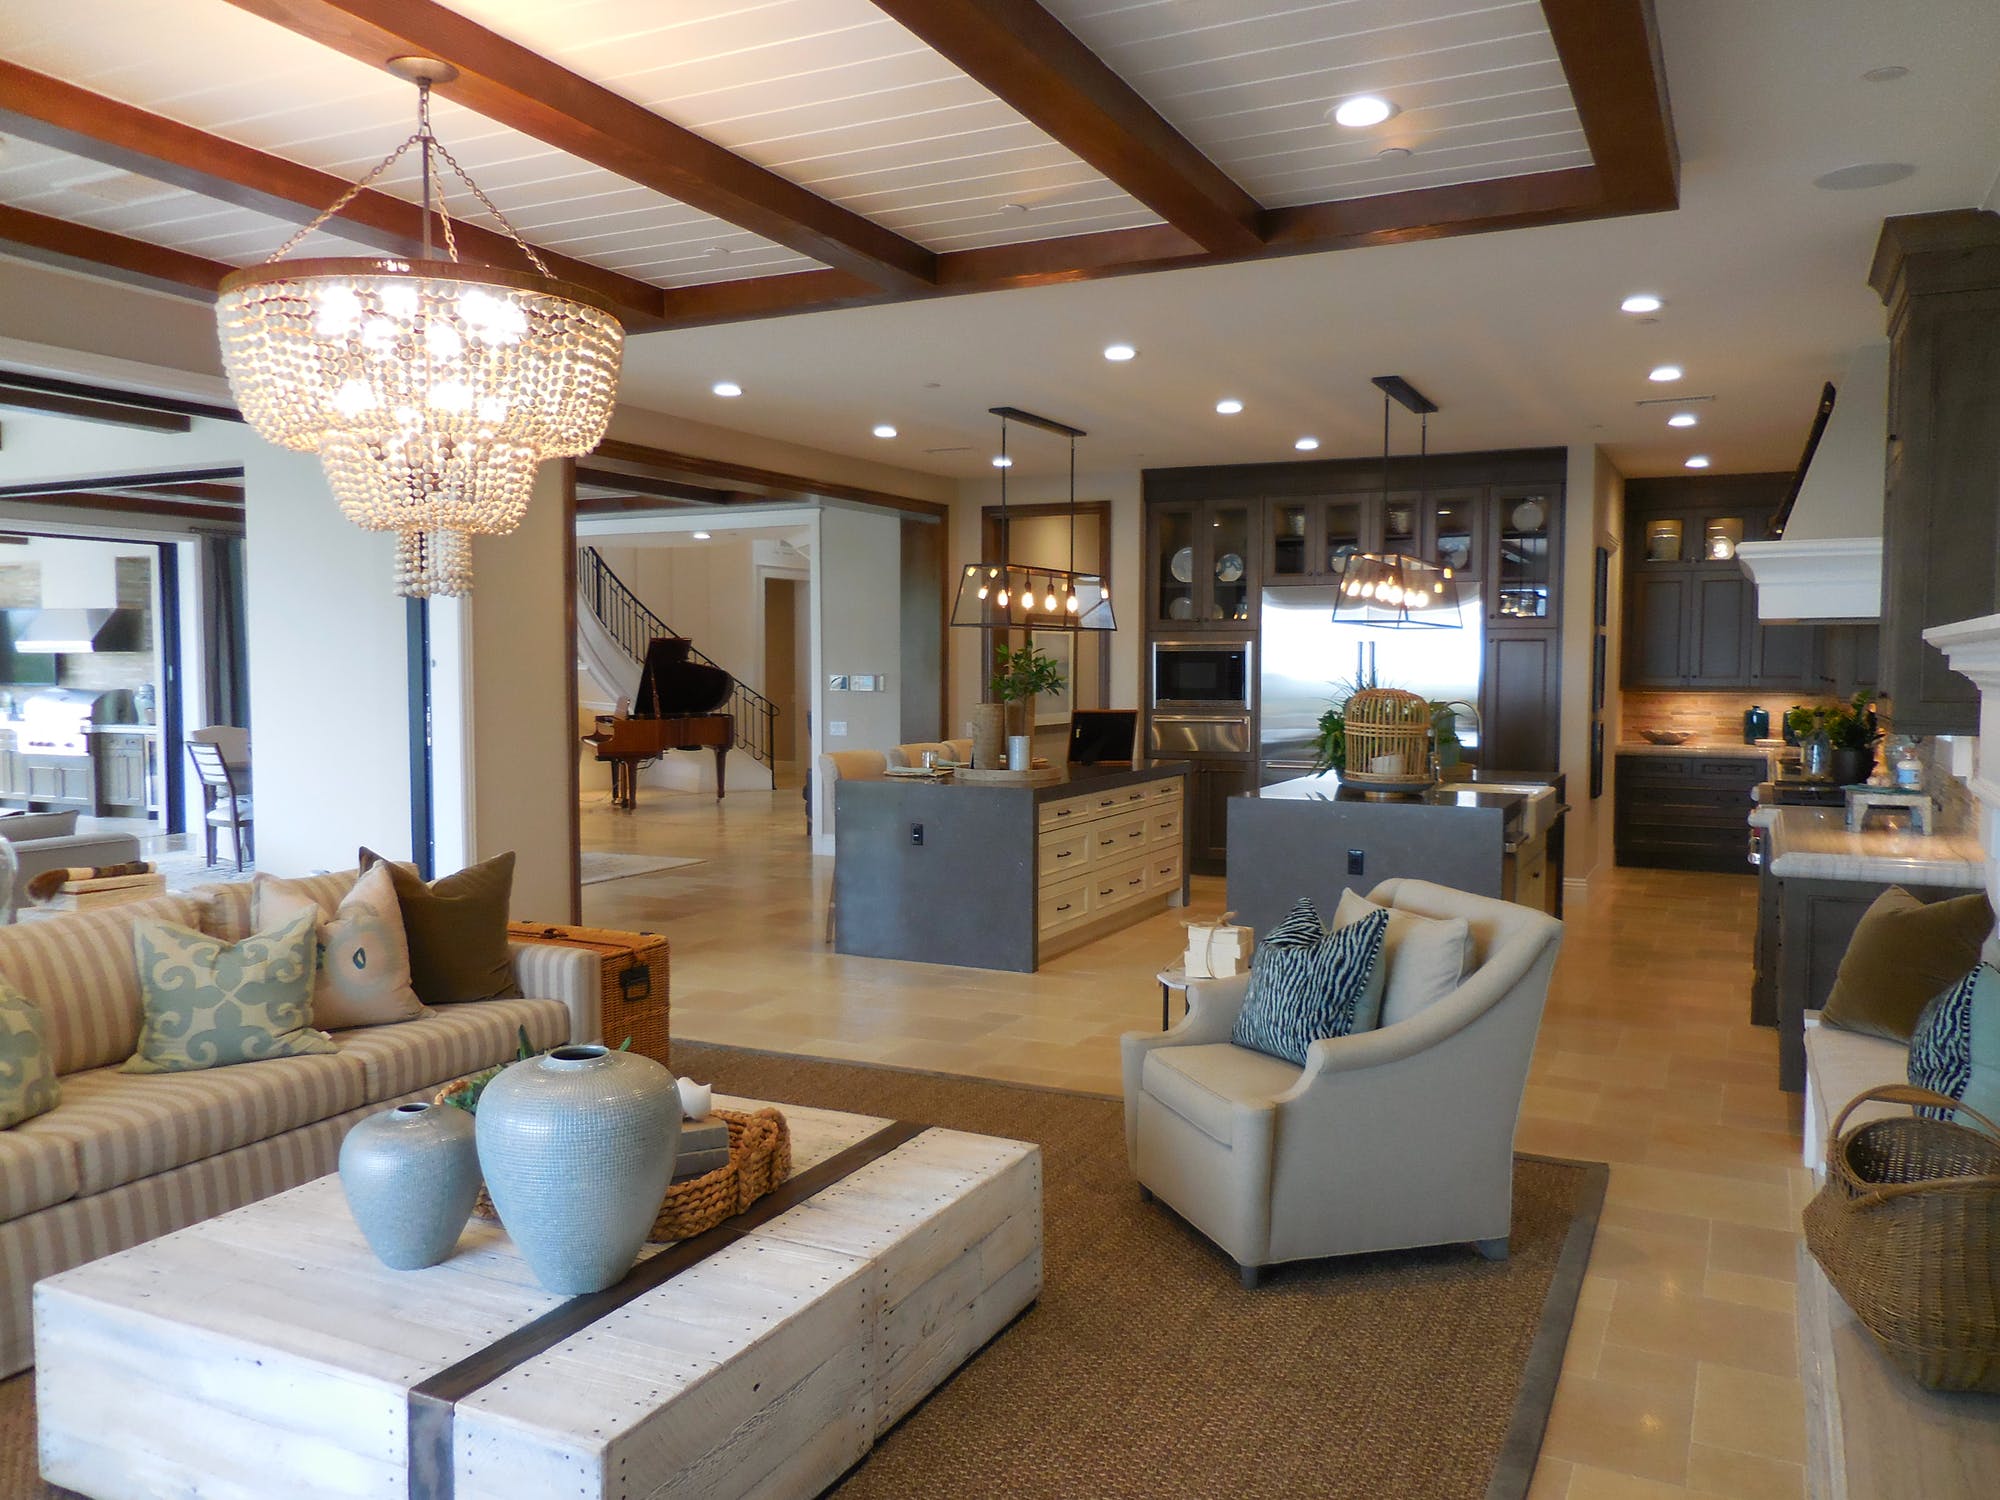 Luxury Living Room and Kitchen Citrus County Fl